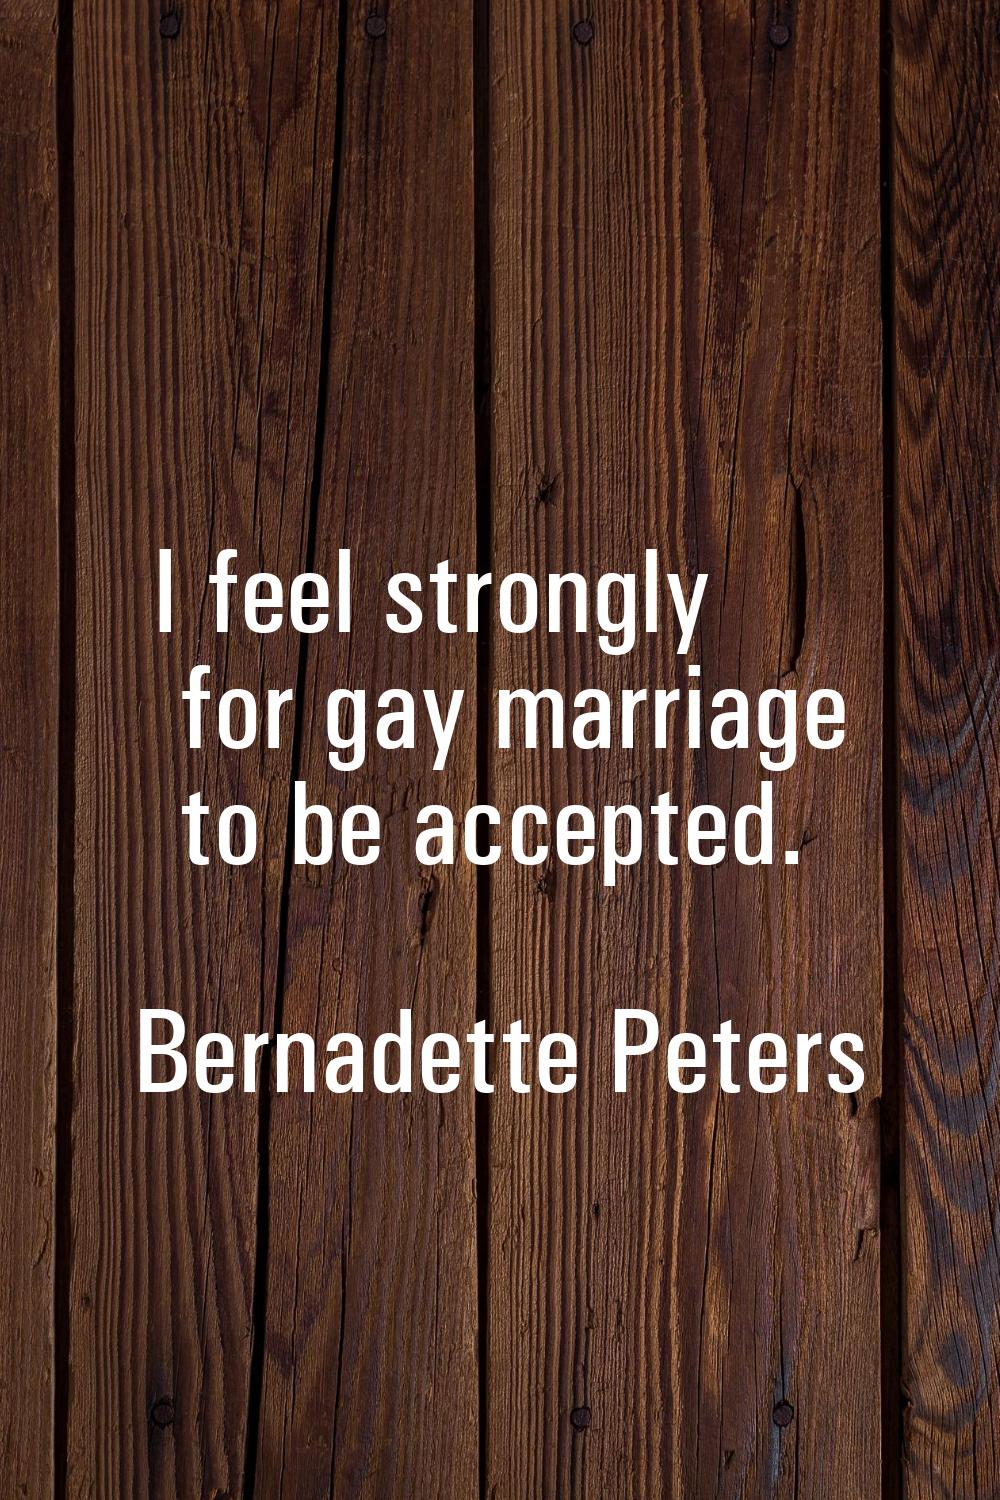 I feel strongly for gay marriage to be accepted.